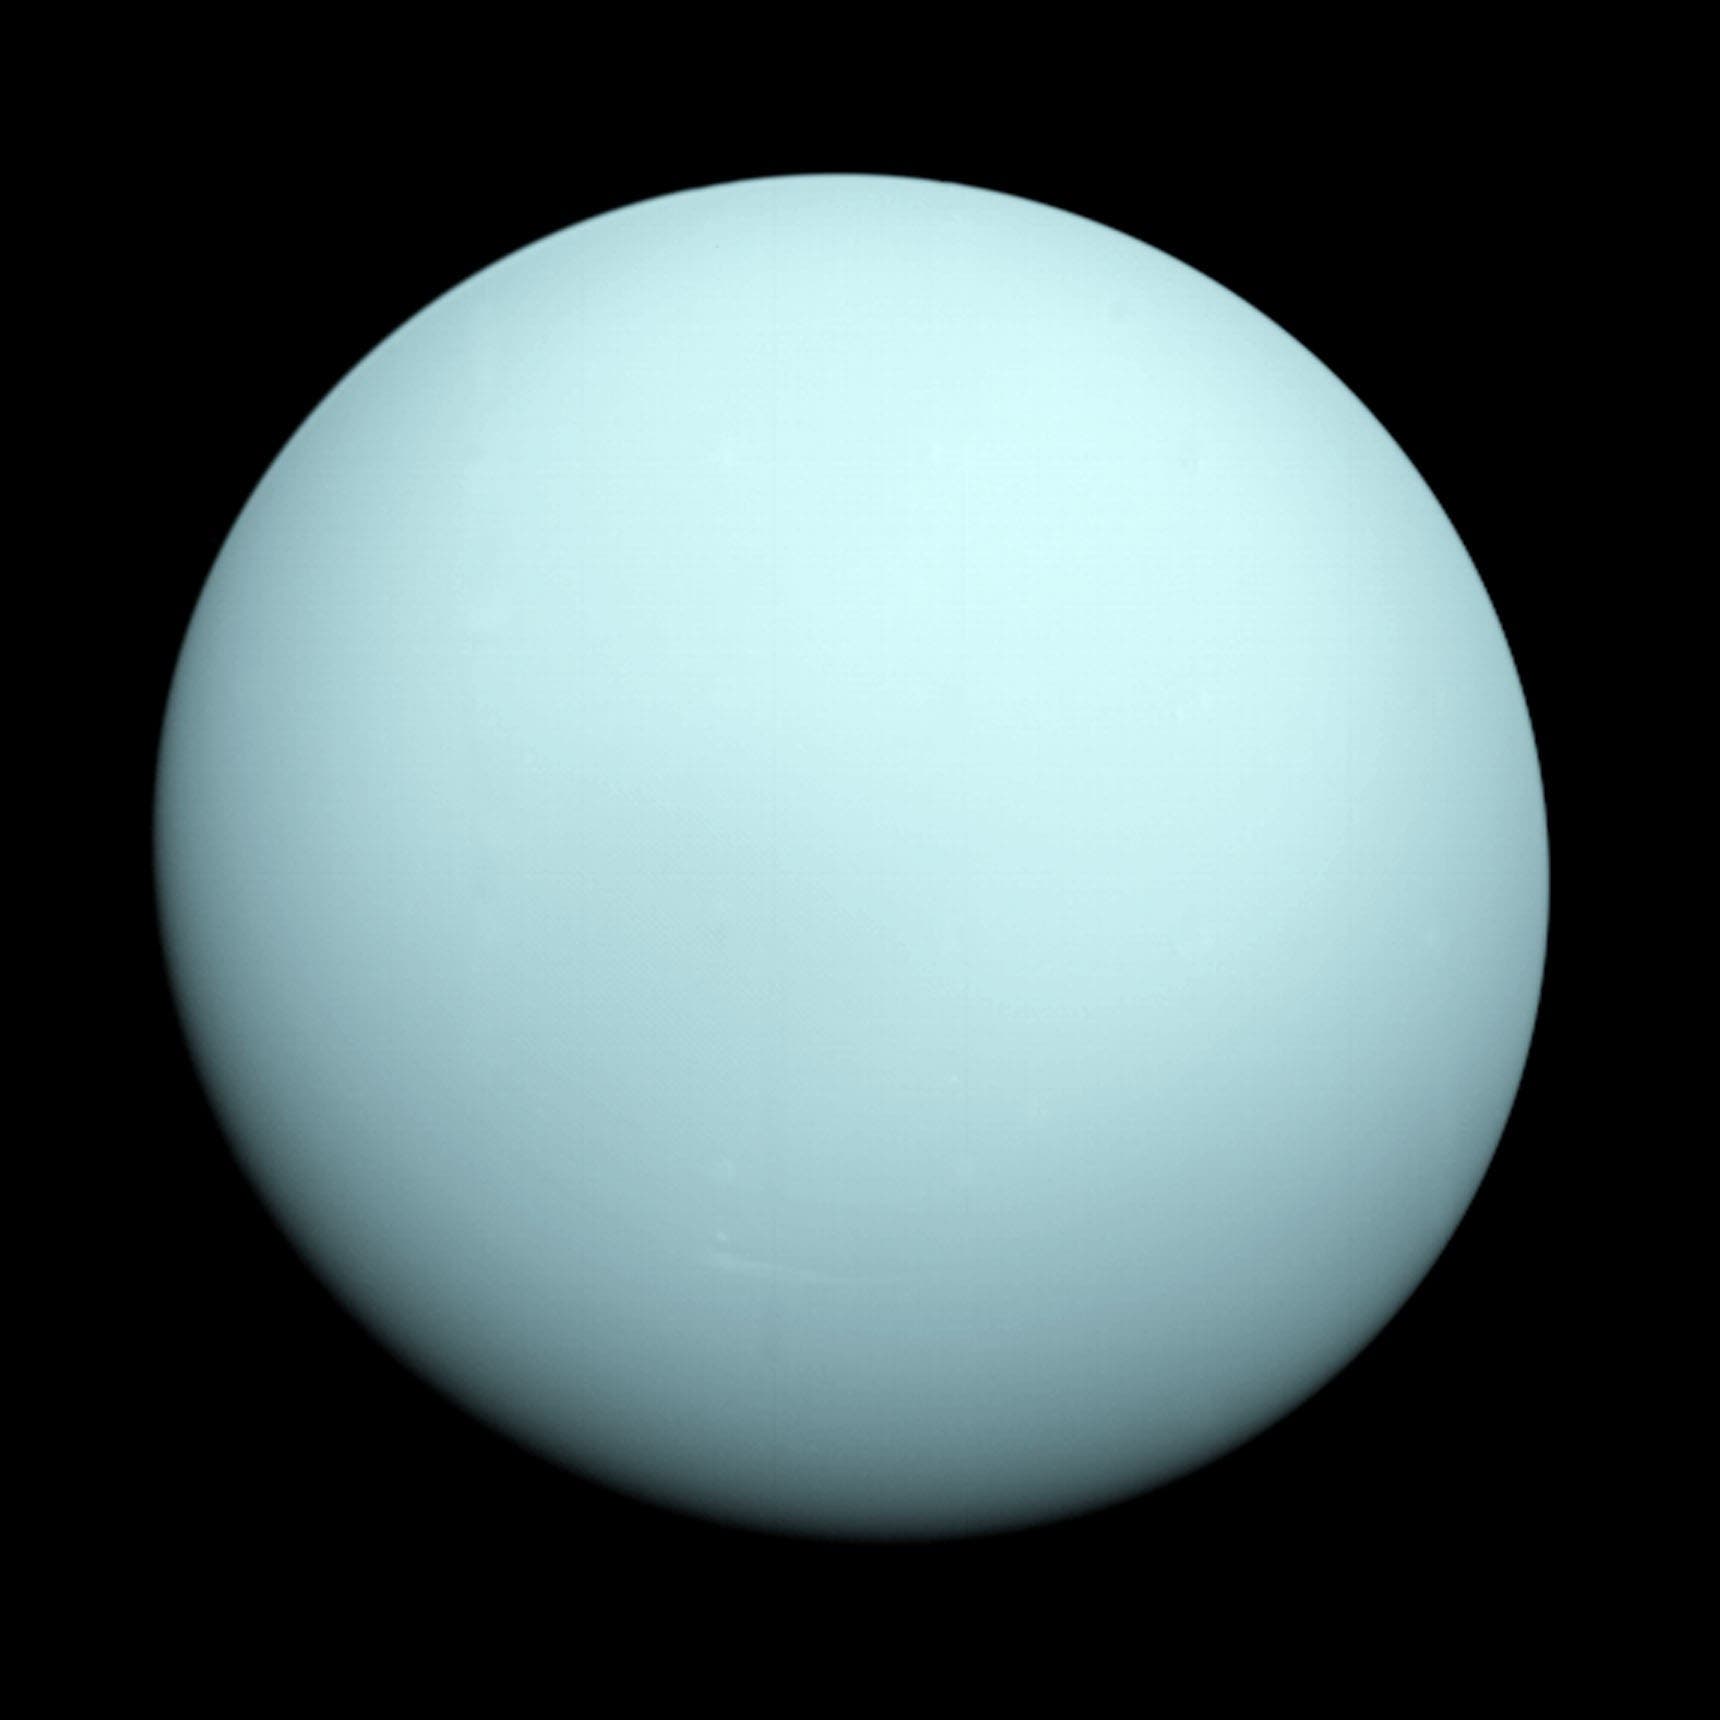 Uranus as a featureless disc, photographed by Voyager 2 in 1986.